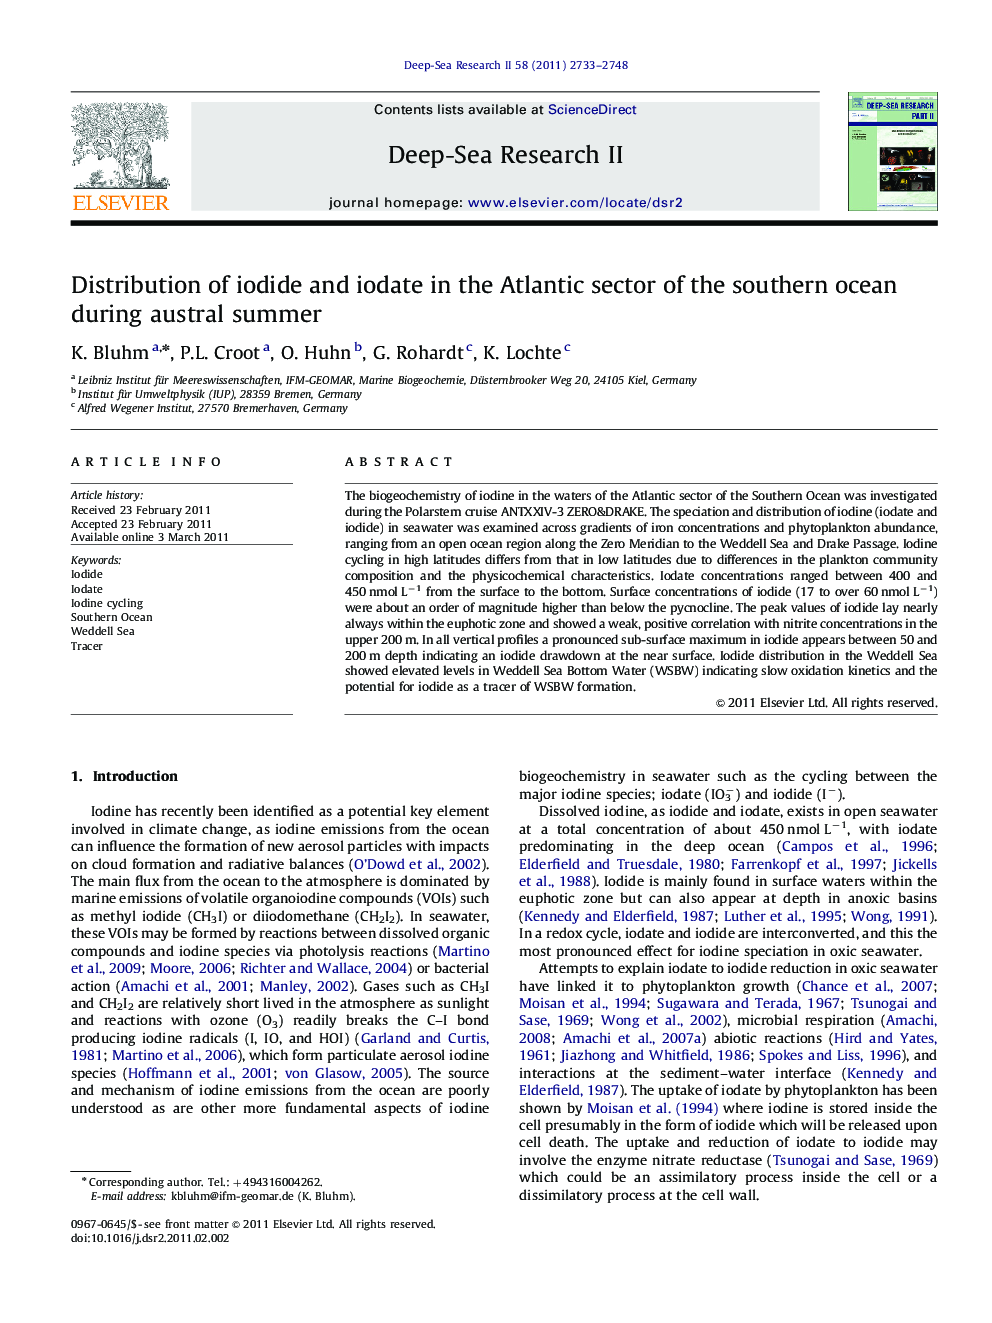 Distribution of iodide and iodate in the Atlantic sector of the southern ocean during austral summer